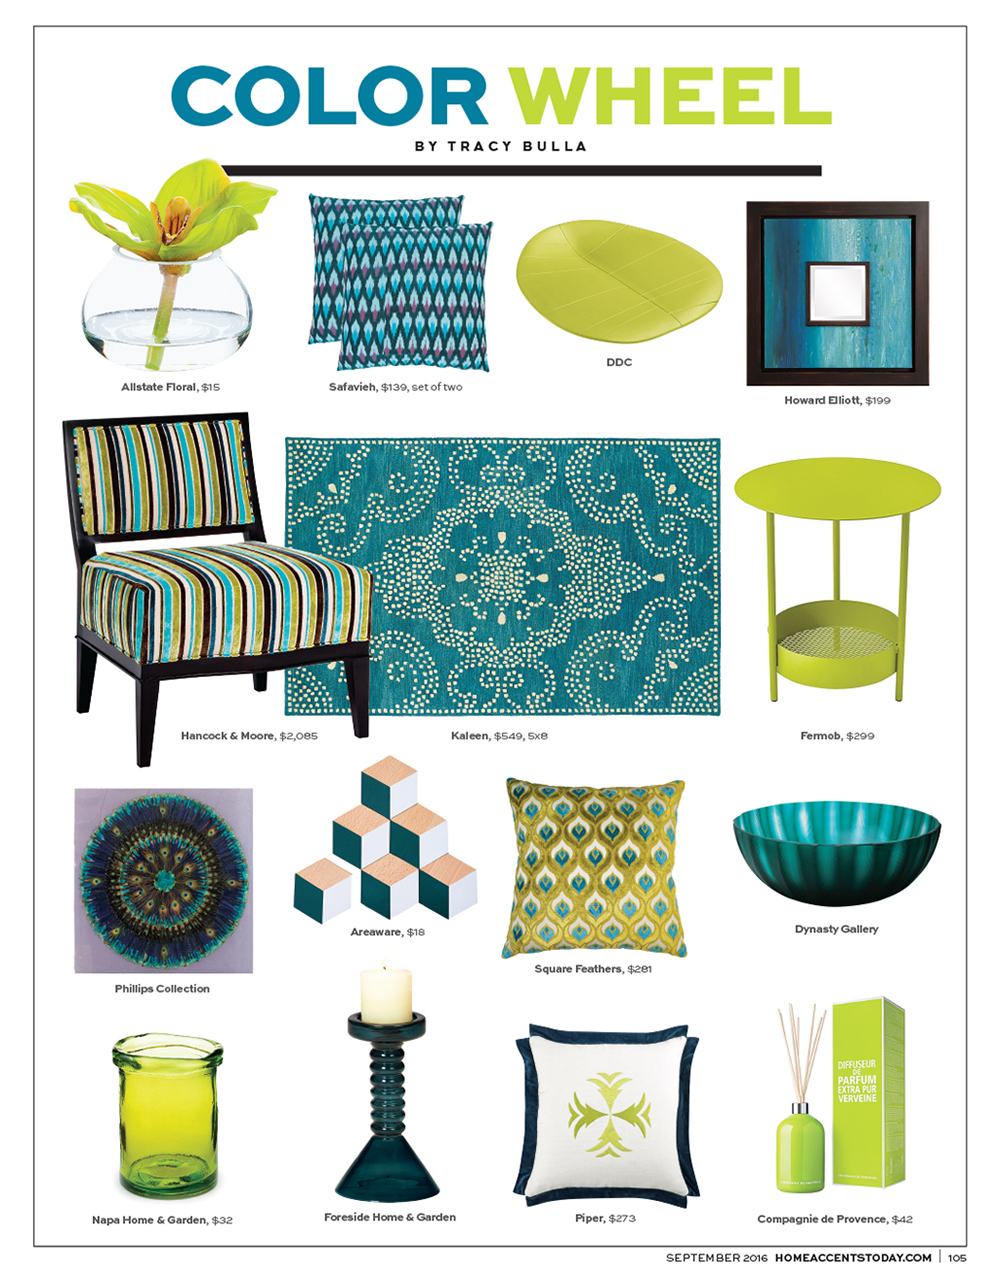 Home Accents Today - 2016 September Color Wheel